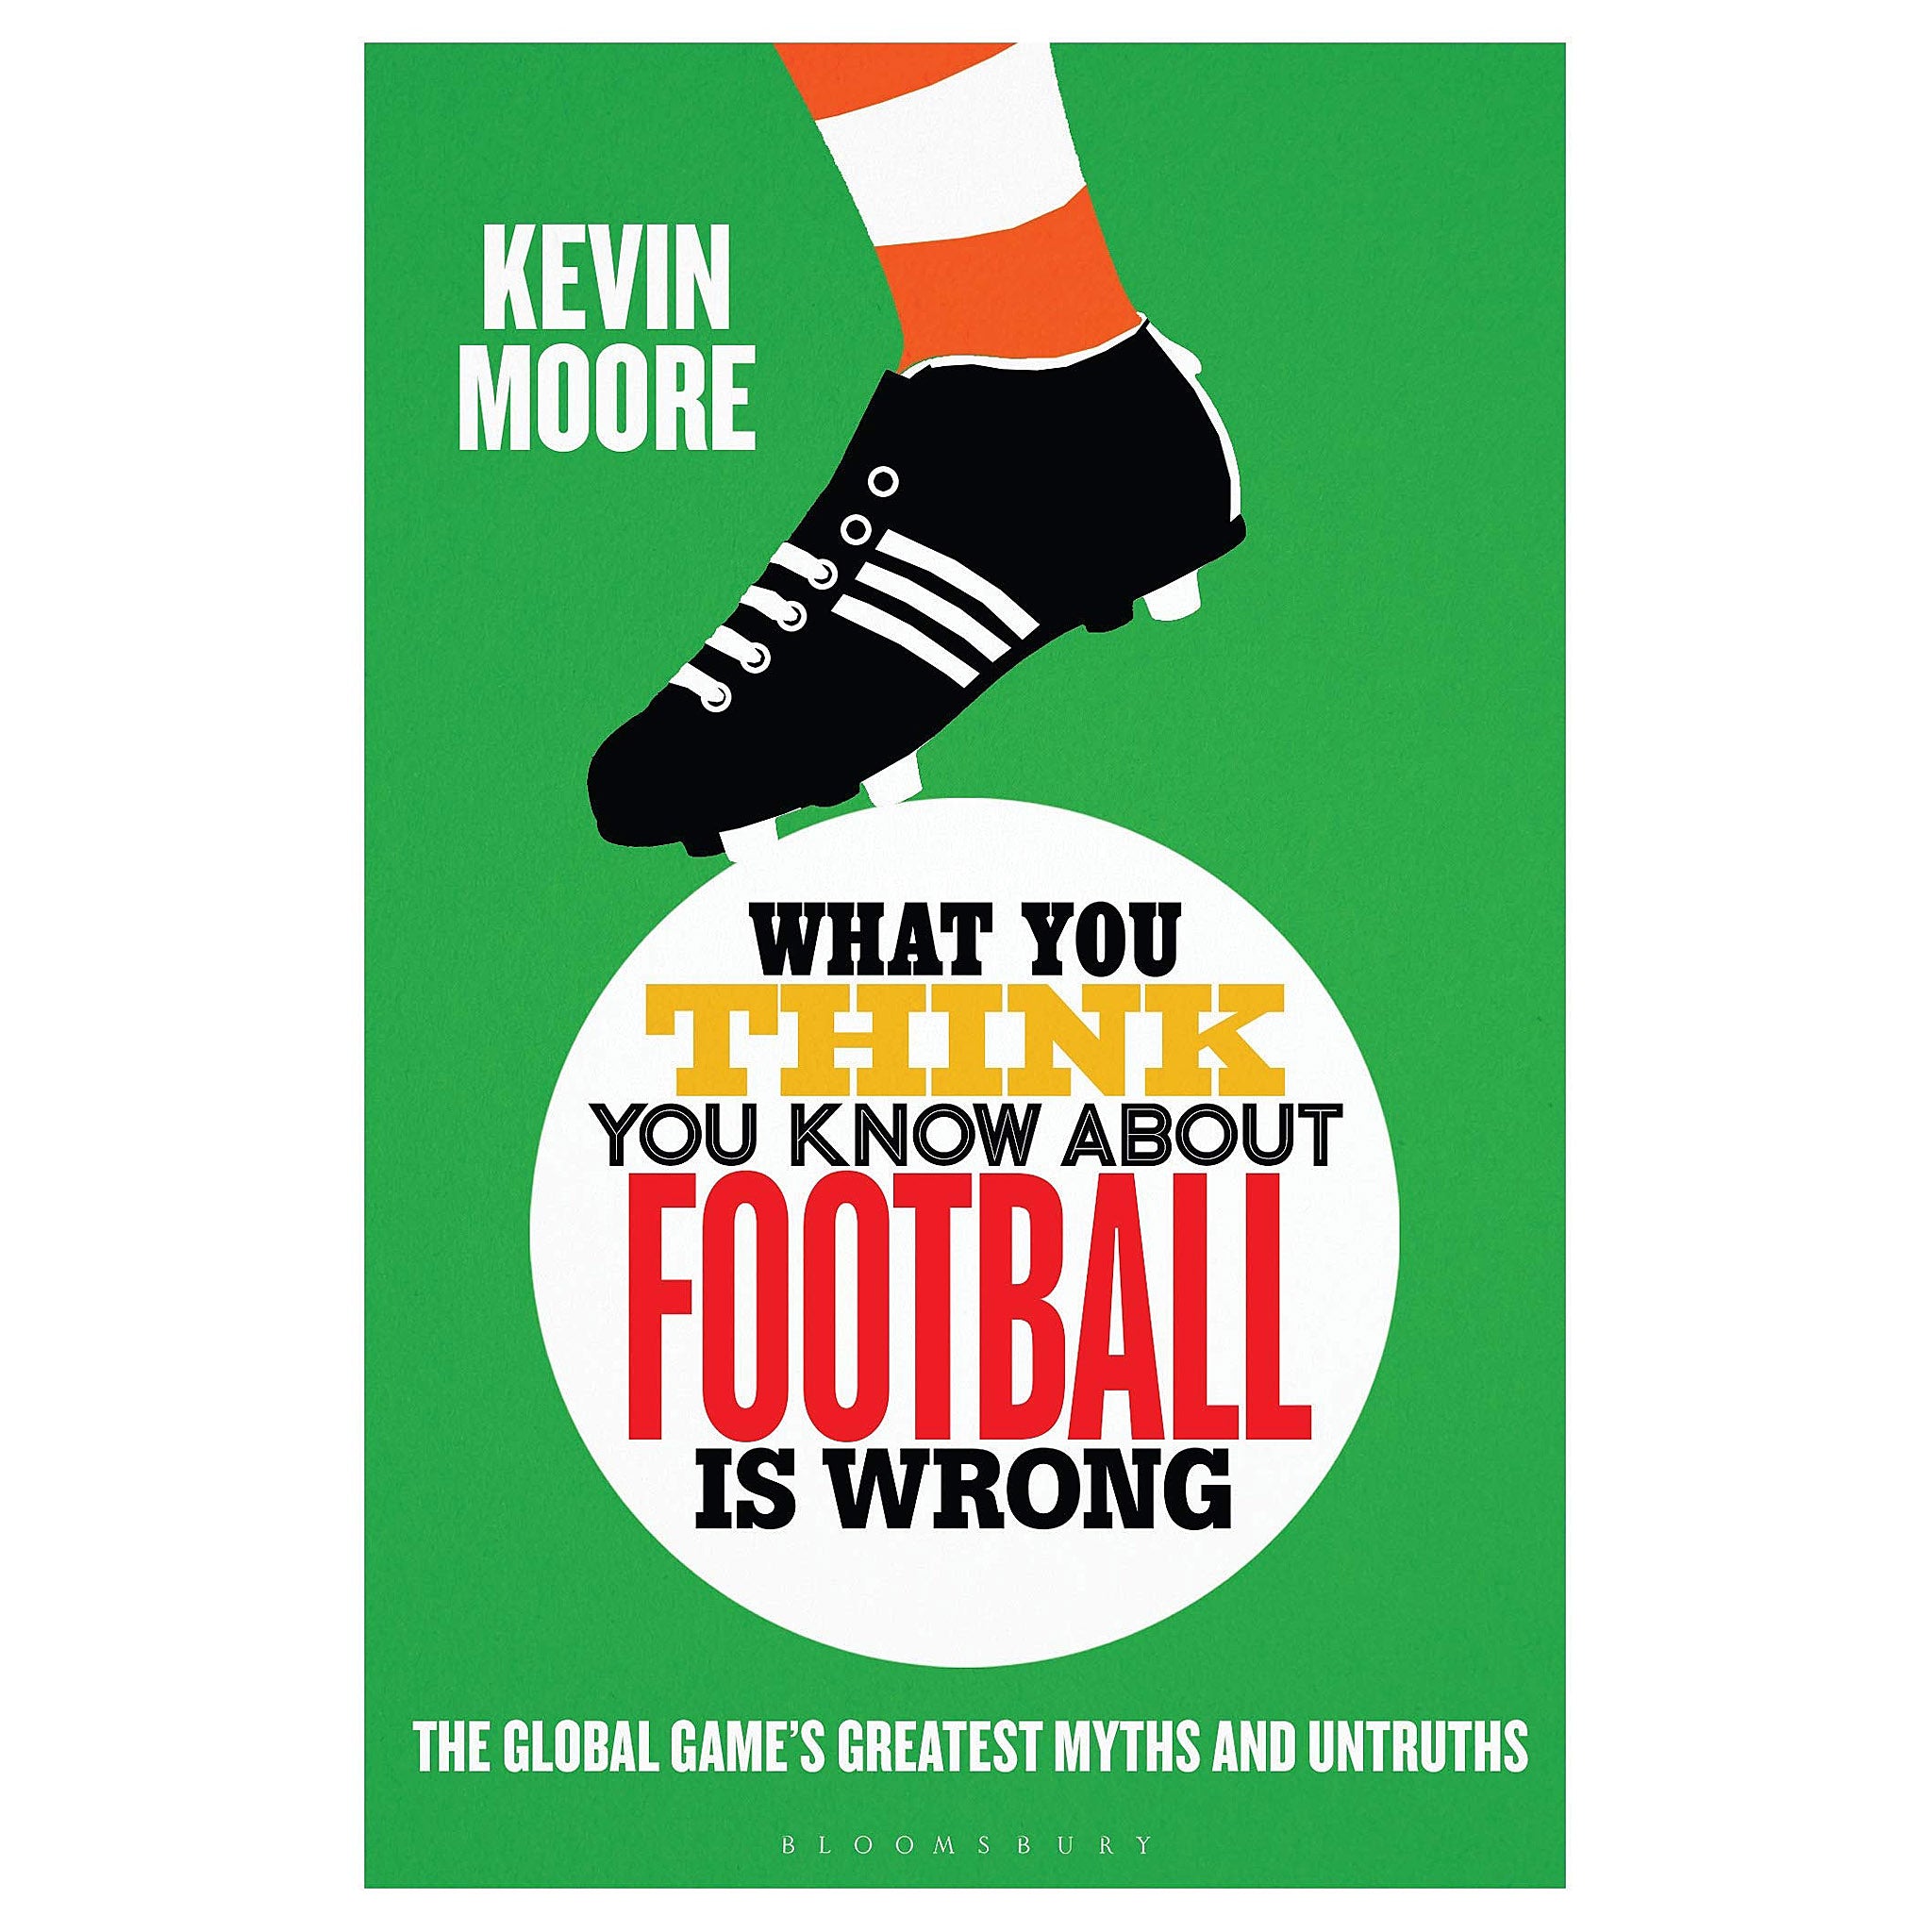 What You Think You Know About Football is Wrong – The Global Game's Greatest Myths and Untruths